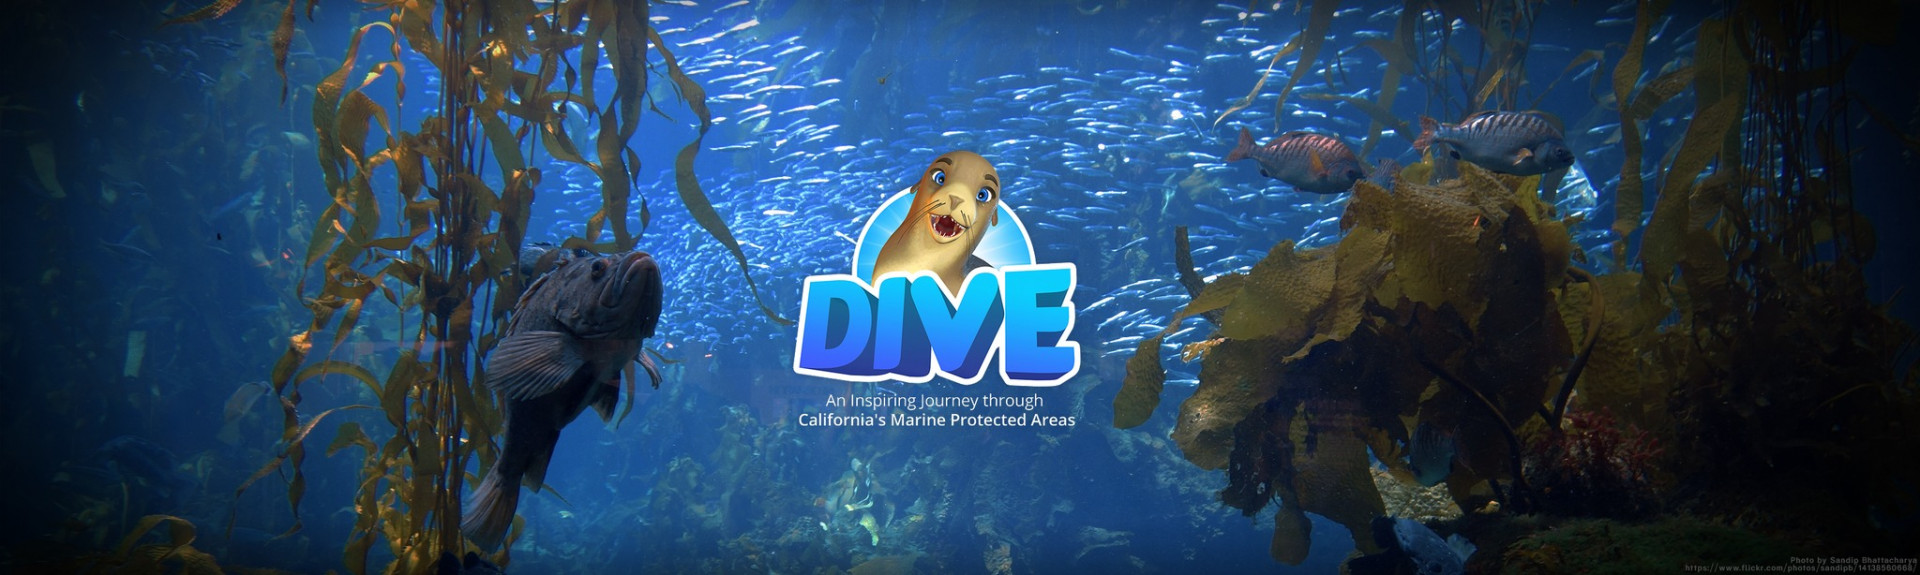 DIVE: An Inspiring Journey through California's Marine Protected Areas